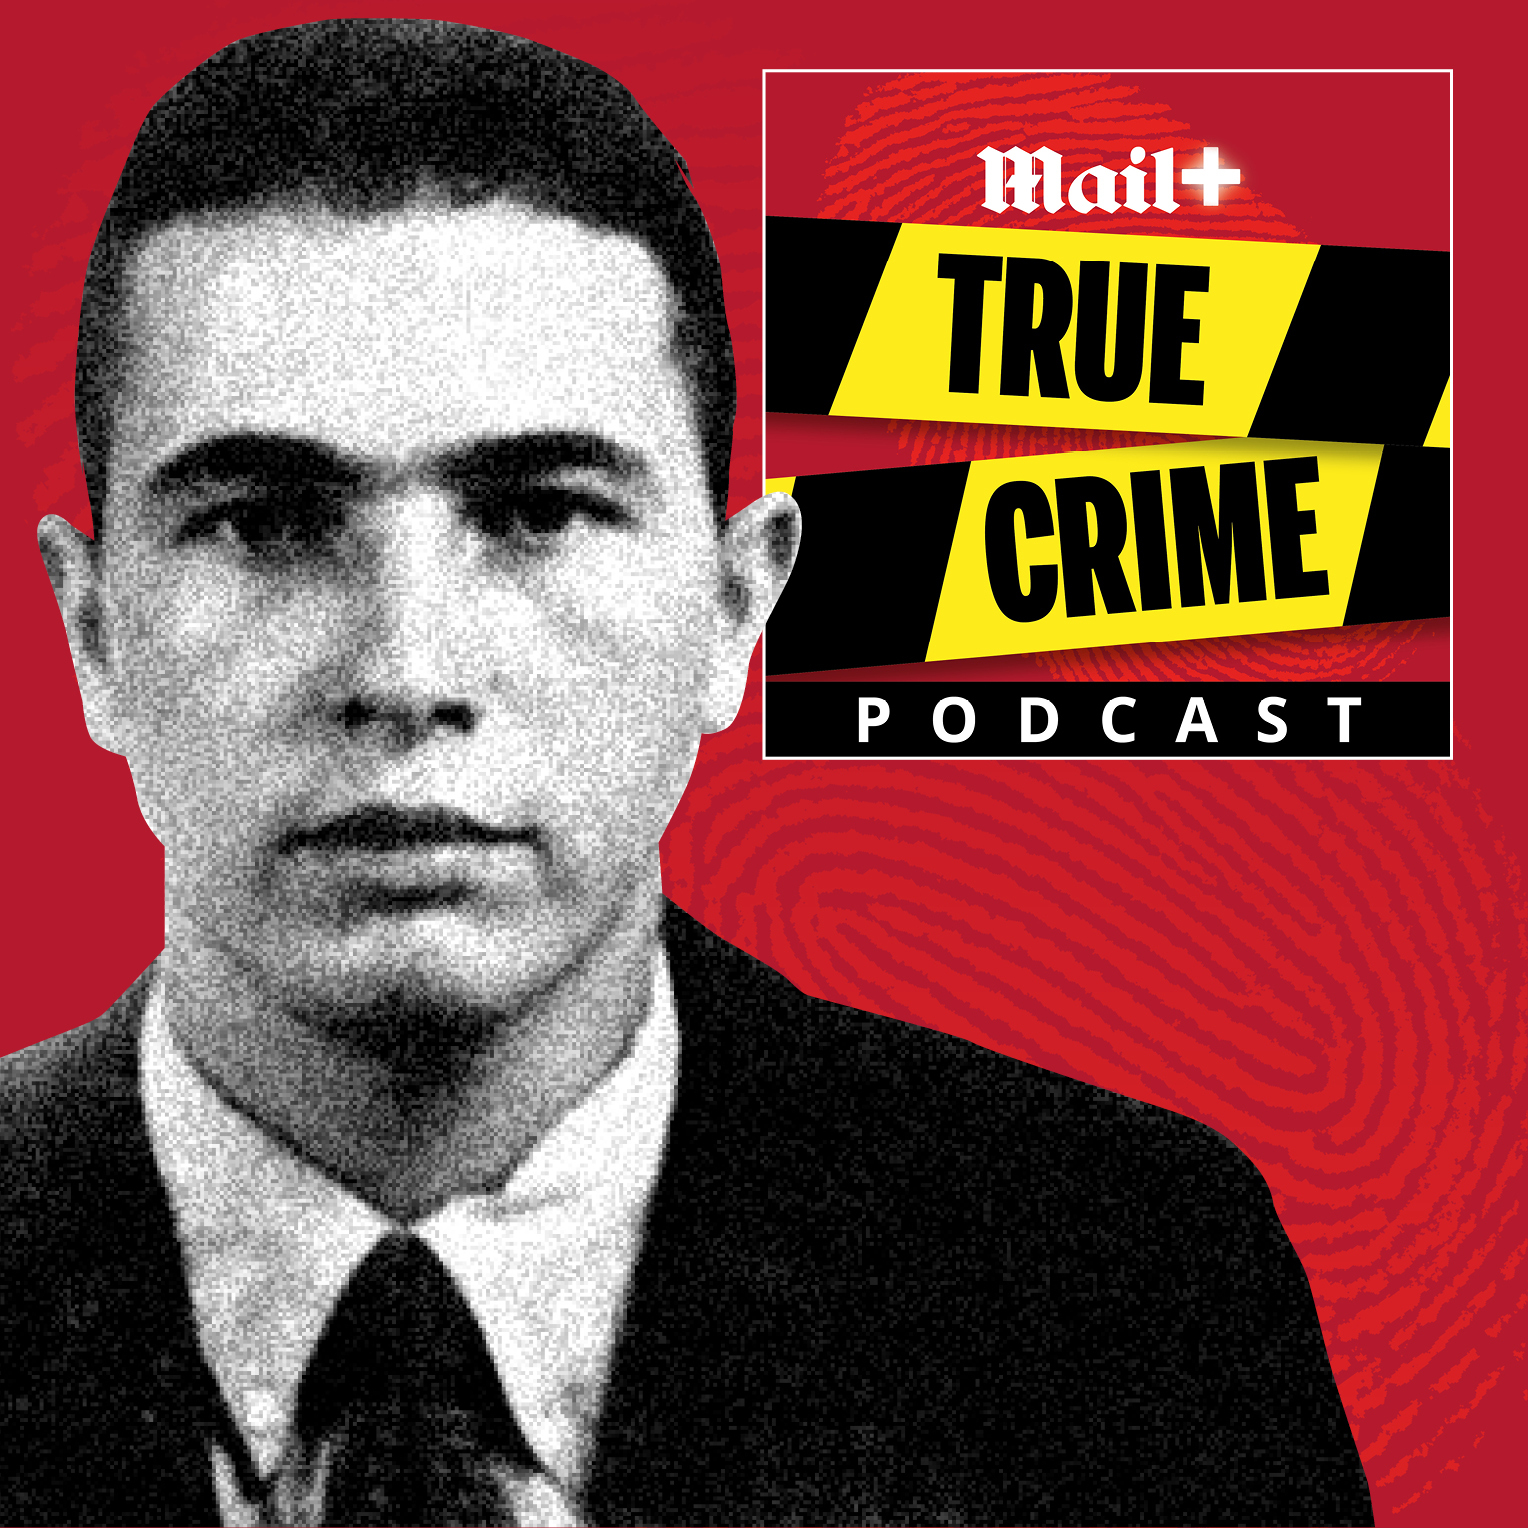 When police kill: An interview with Britain’s most controversial police marksman - Part 1